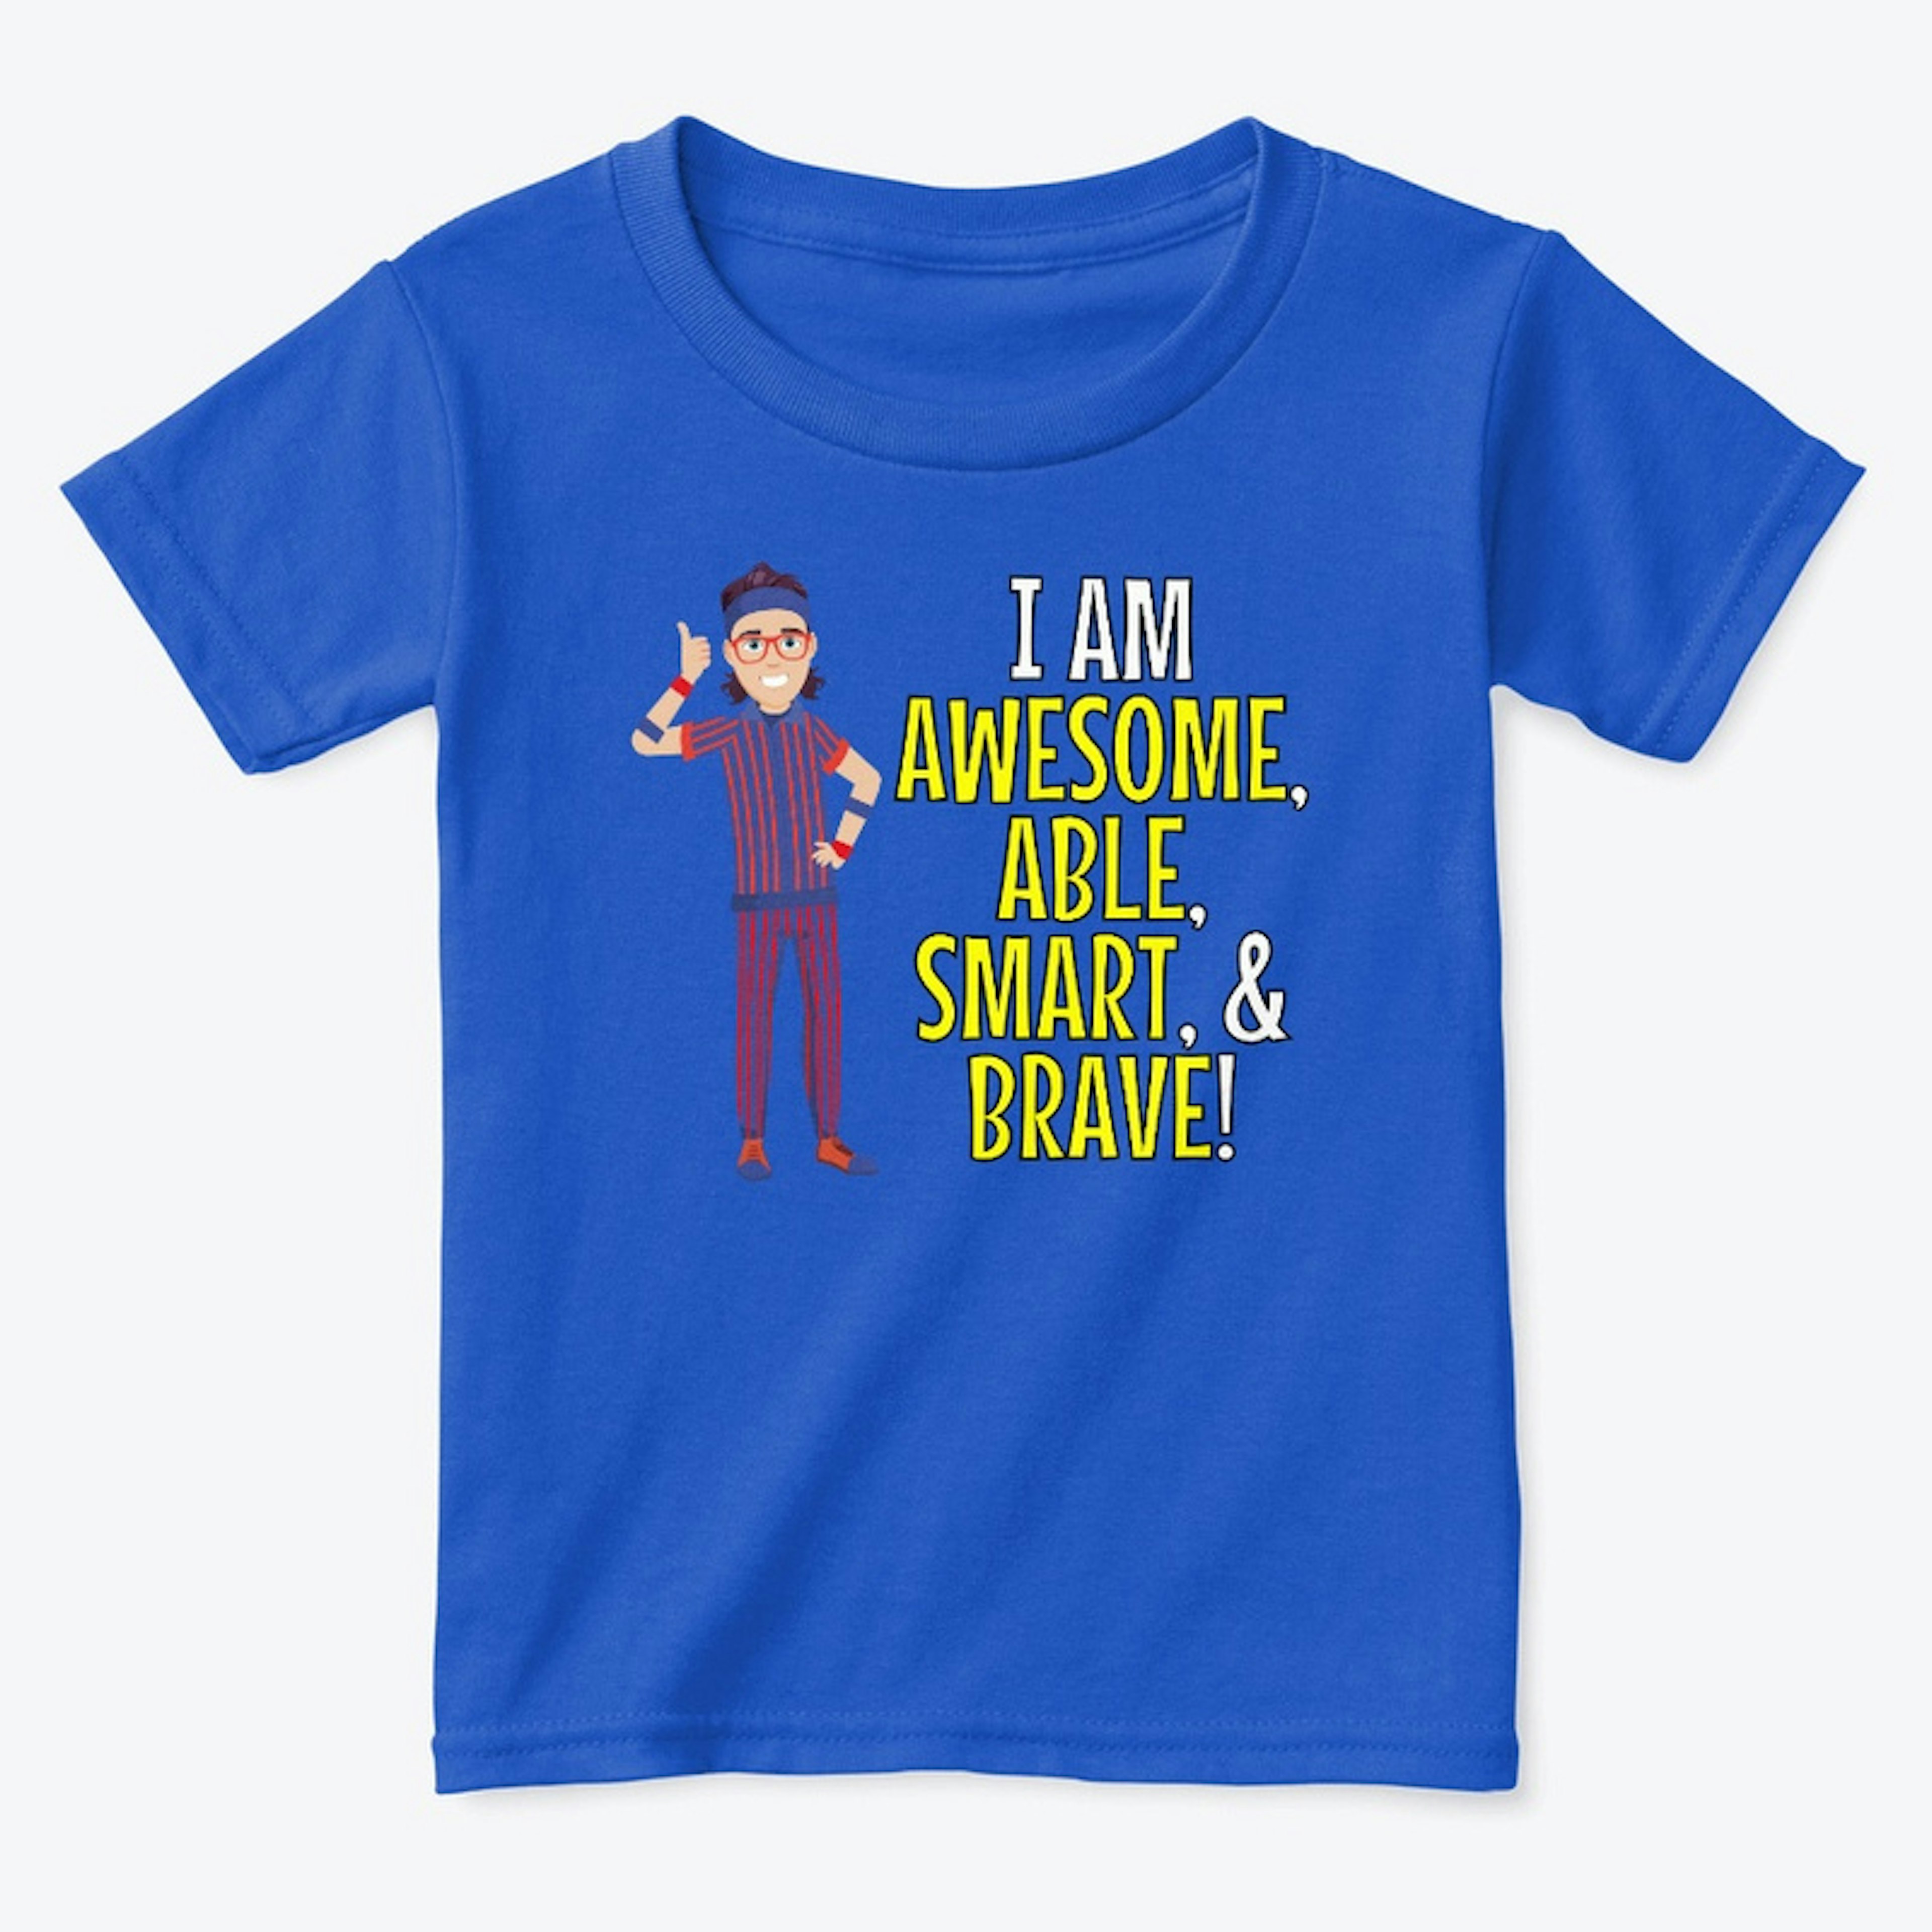 Awesome, Able, Smart, and Brave!